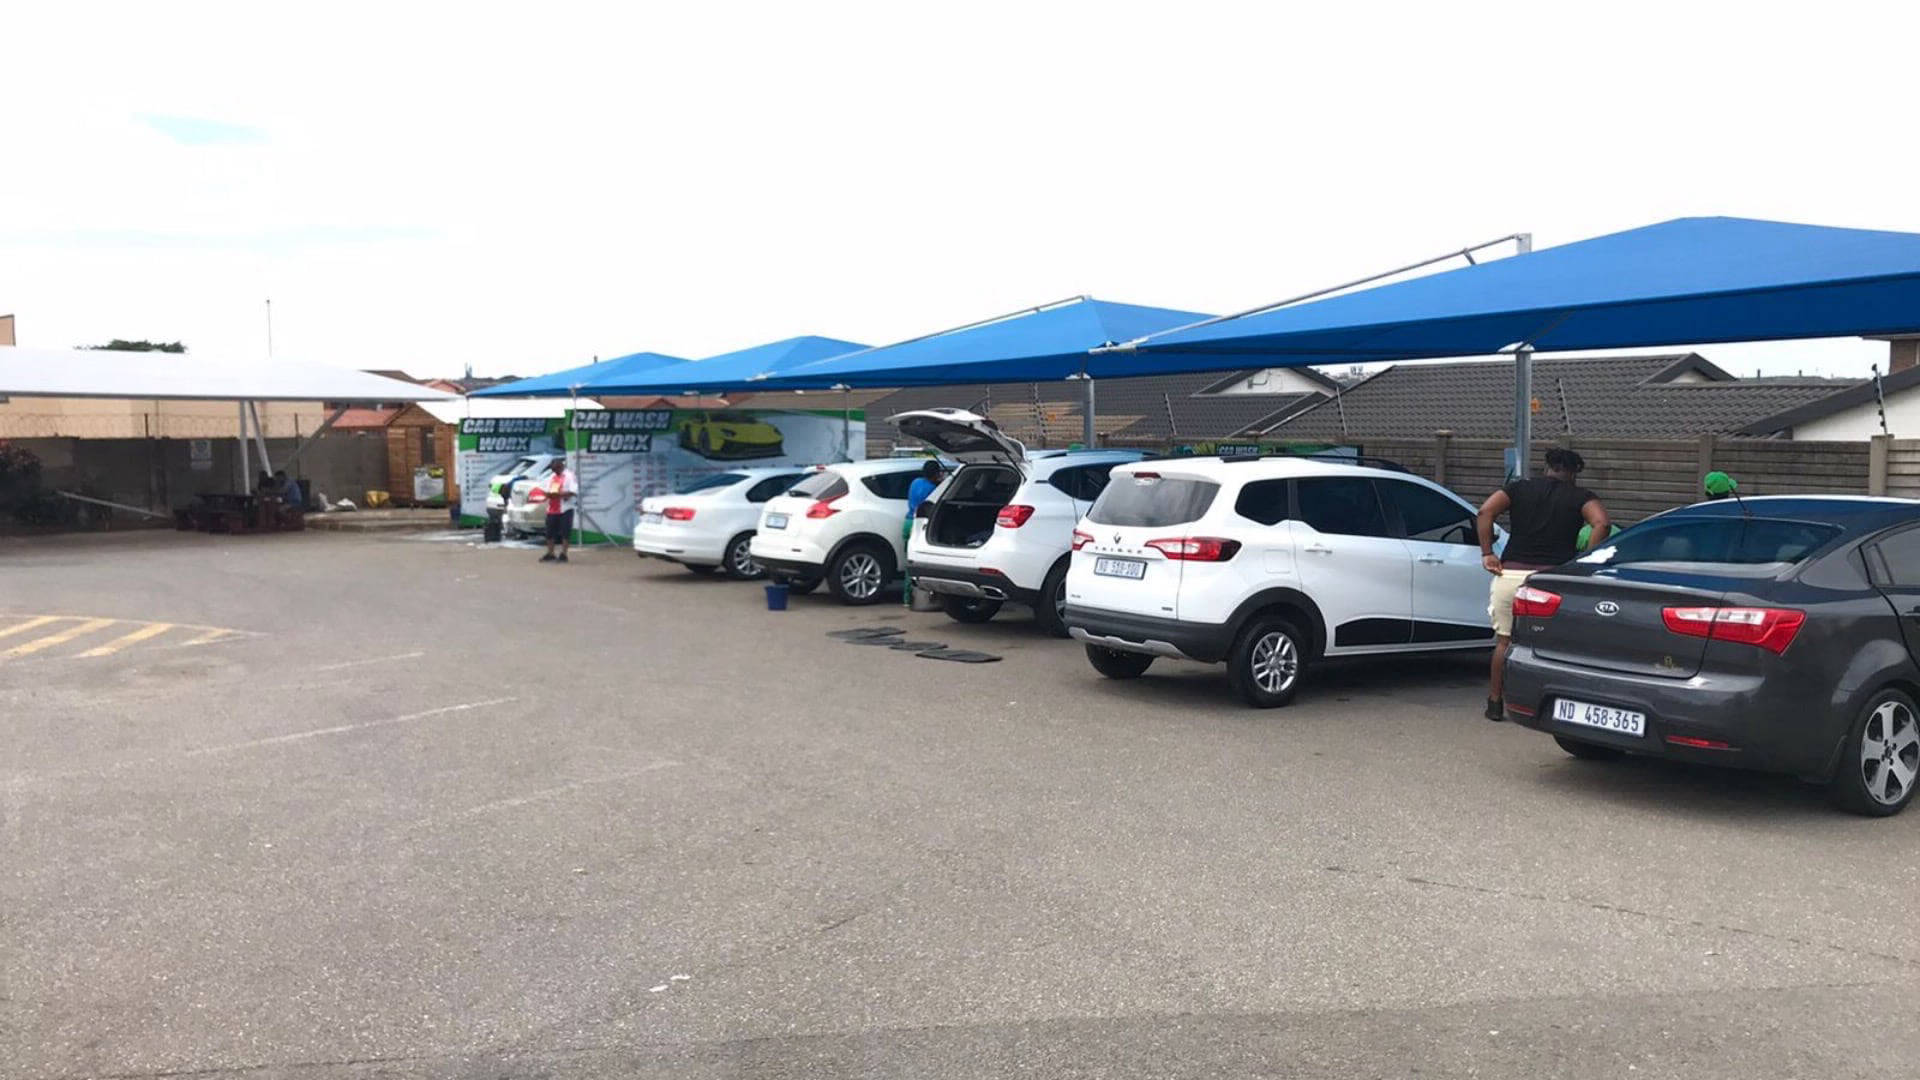 Car Wash Franchises Available, CarWash Worx Head Office, Join The Leading Car Wash Franchising Group, Start Your Own Successful Car Wash Business Now